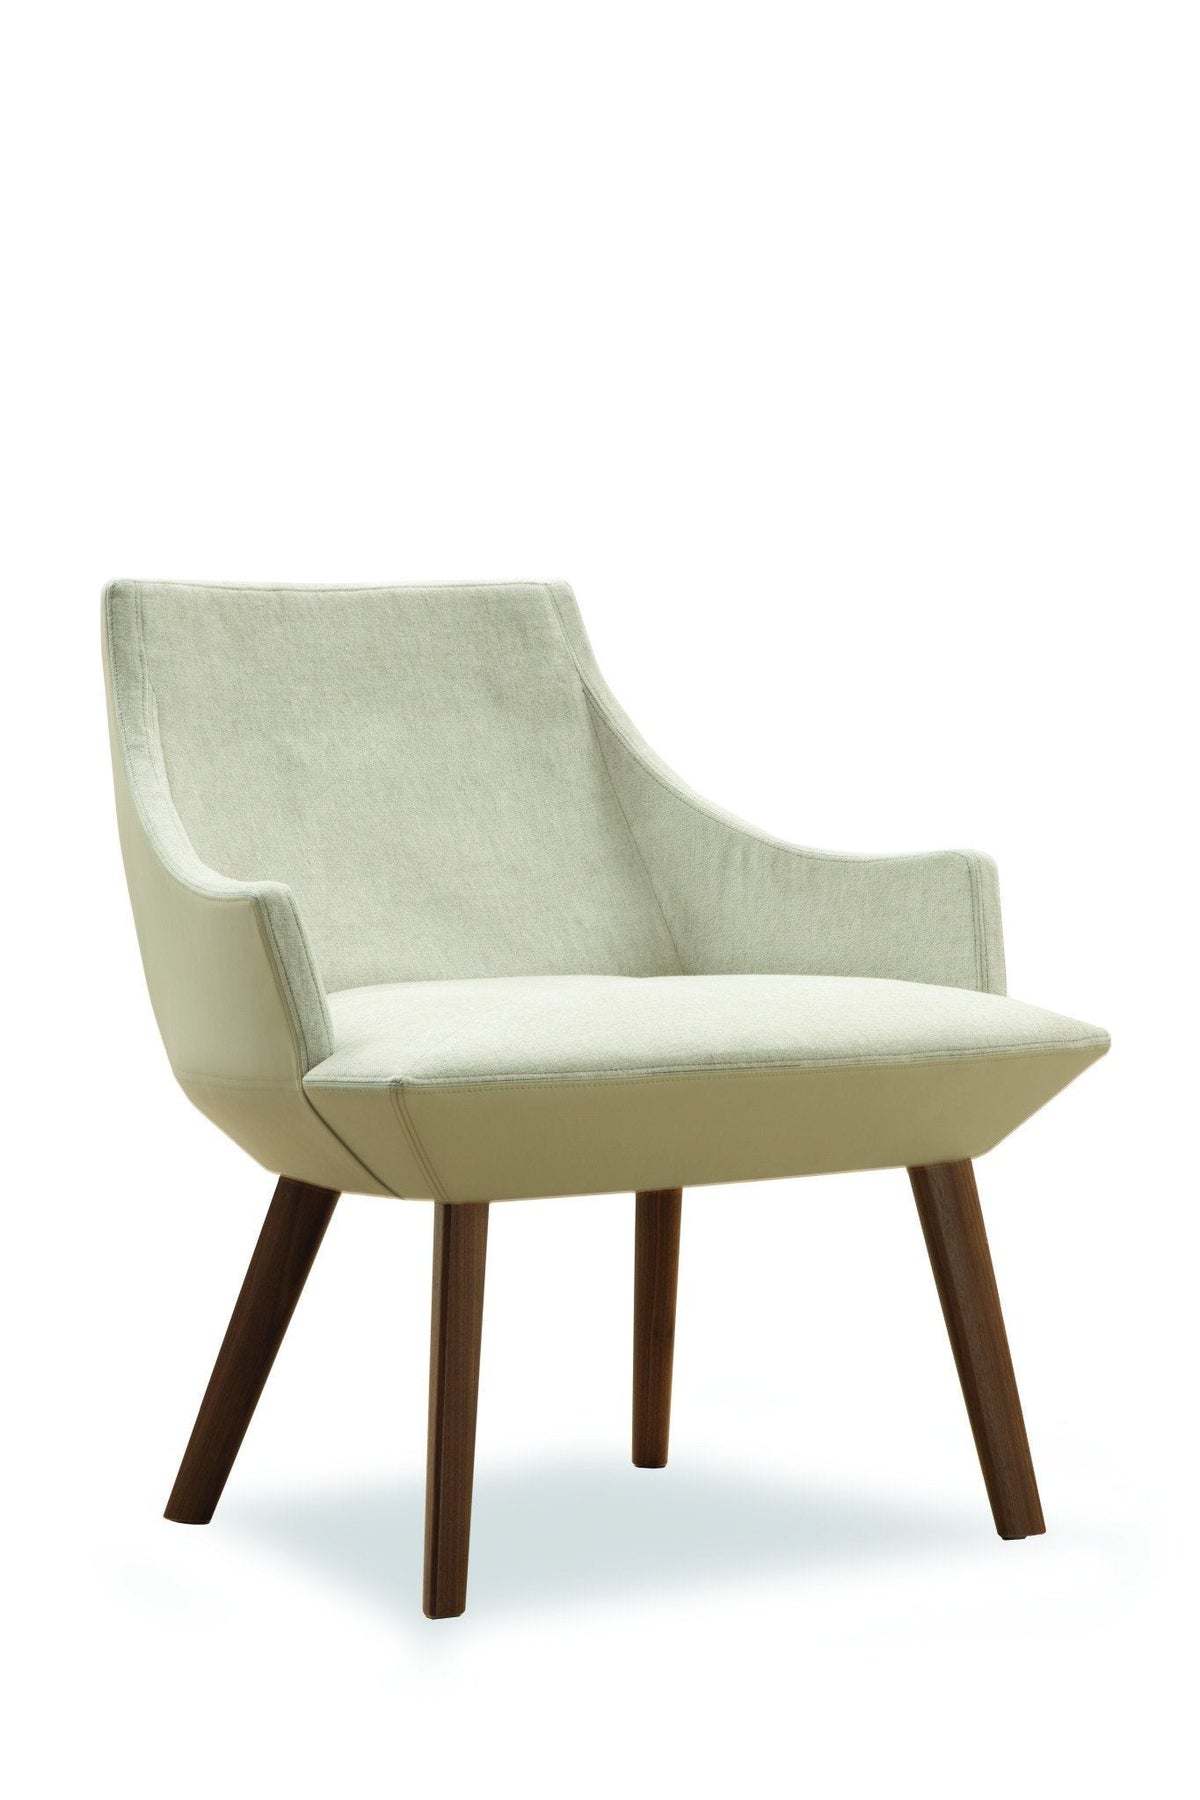 Beret 301 Lounge Chair-Tonon-Contract Furniture Store